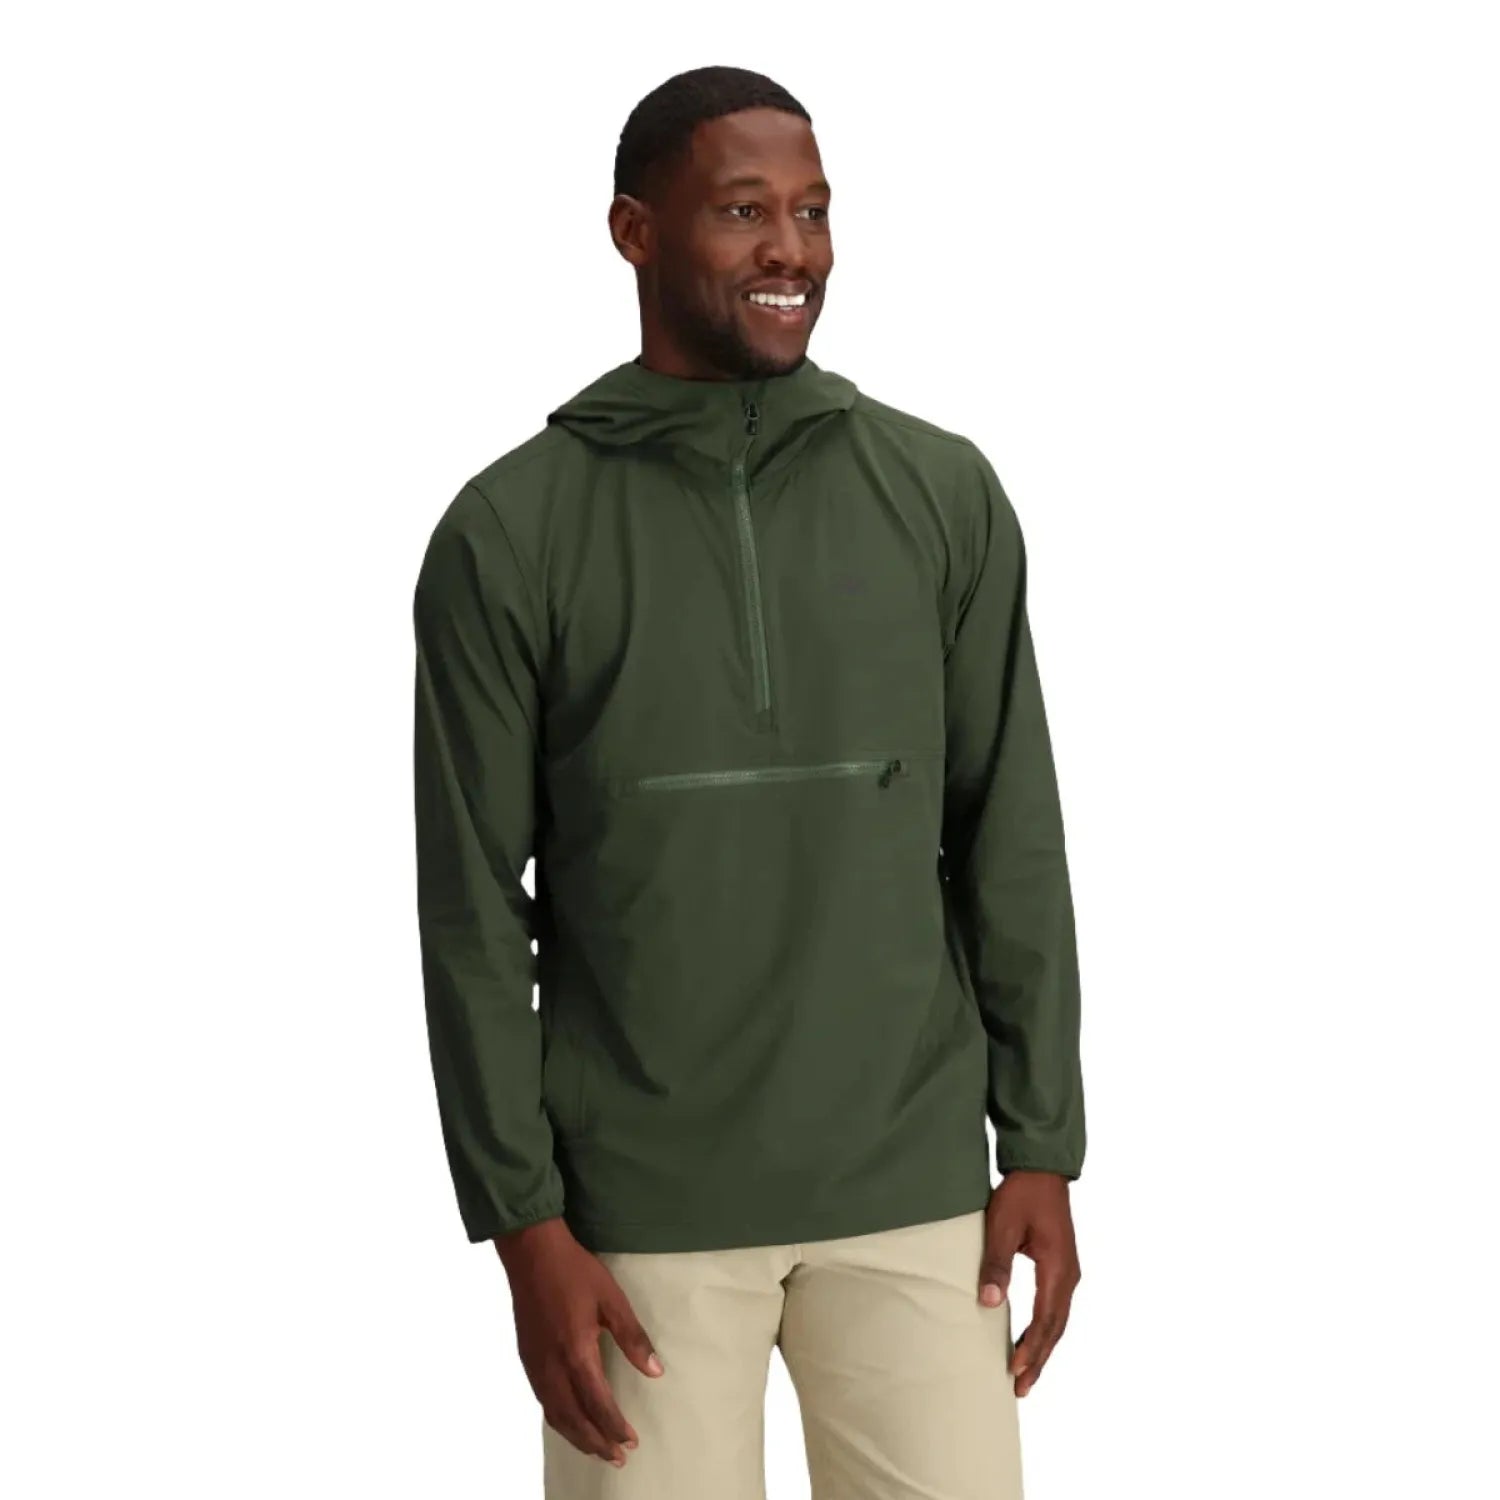 Outdoor Research Men's Ferrosi Anorak shown in the Verde color option. Front view on model.